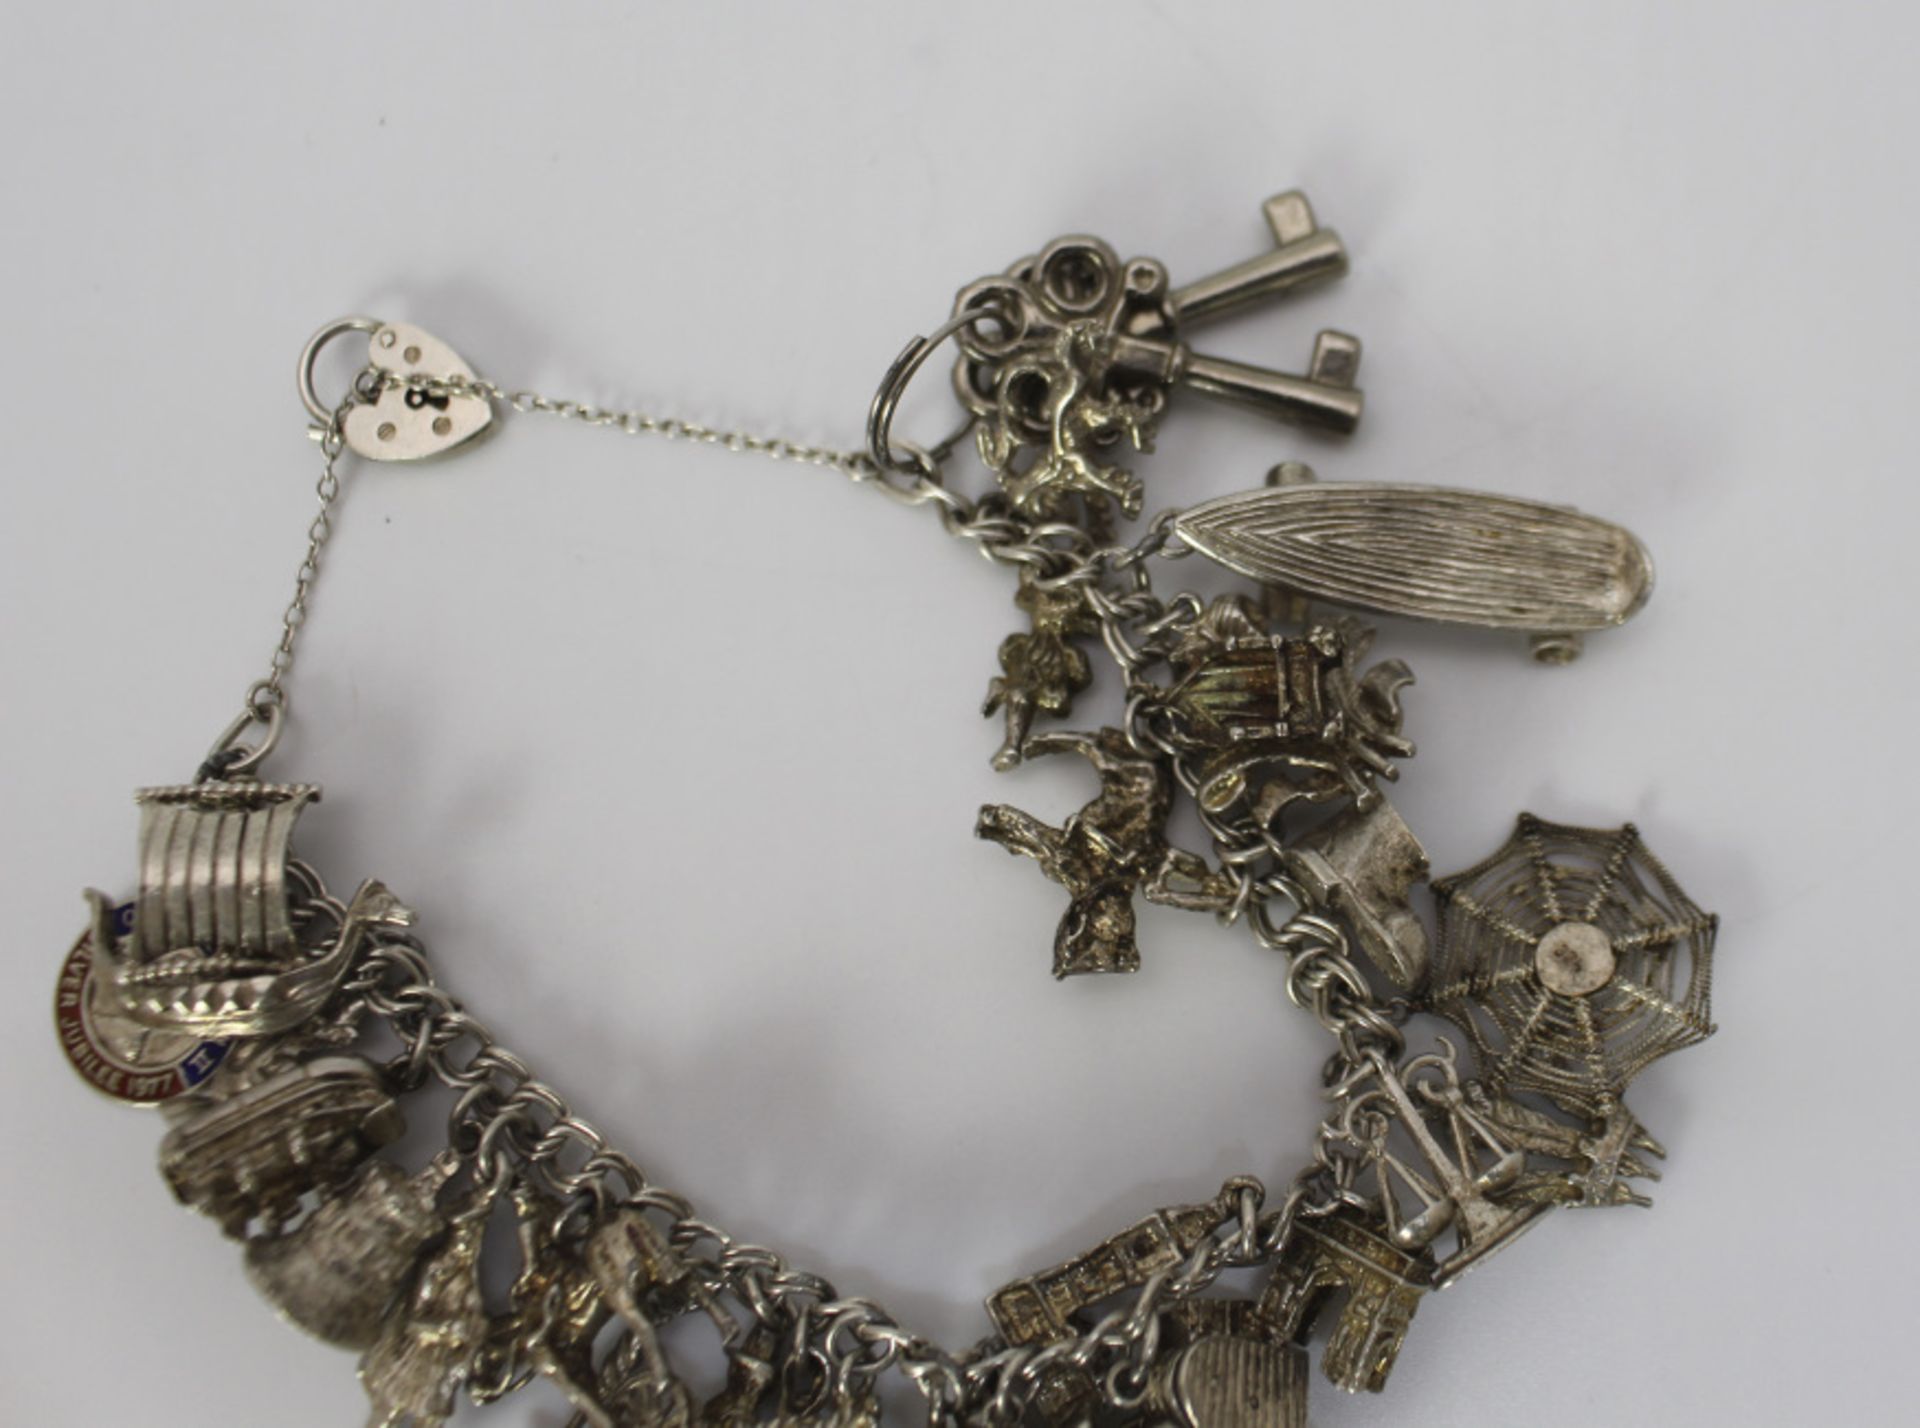 Vintage Silver Charm Bracelet with 30 Charms - Image 2 of 3